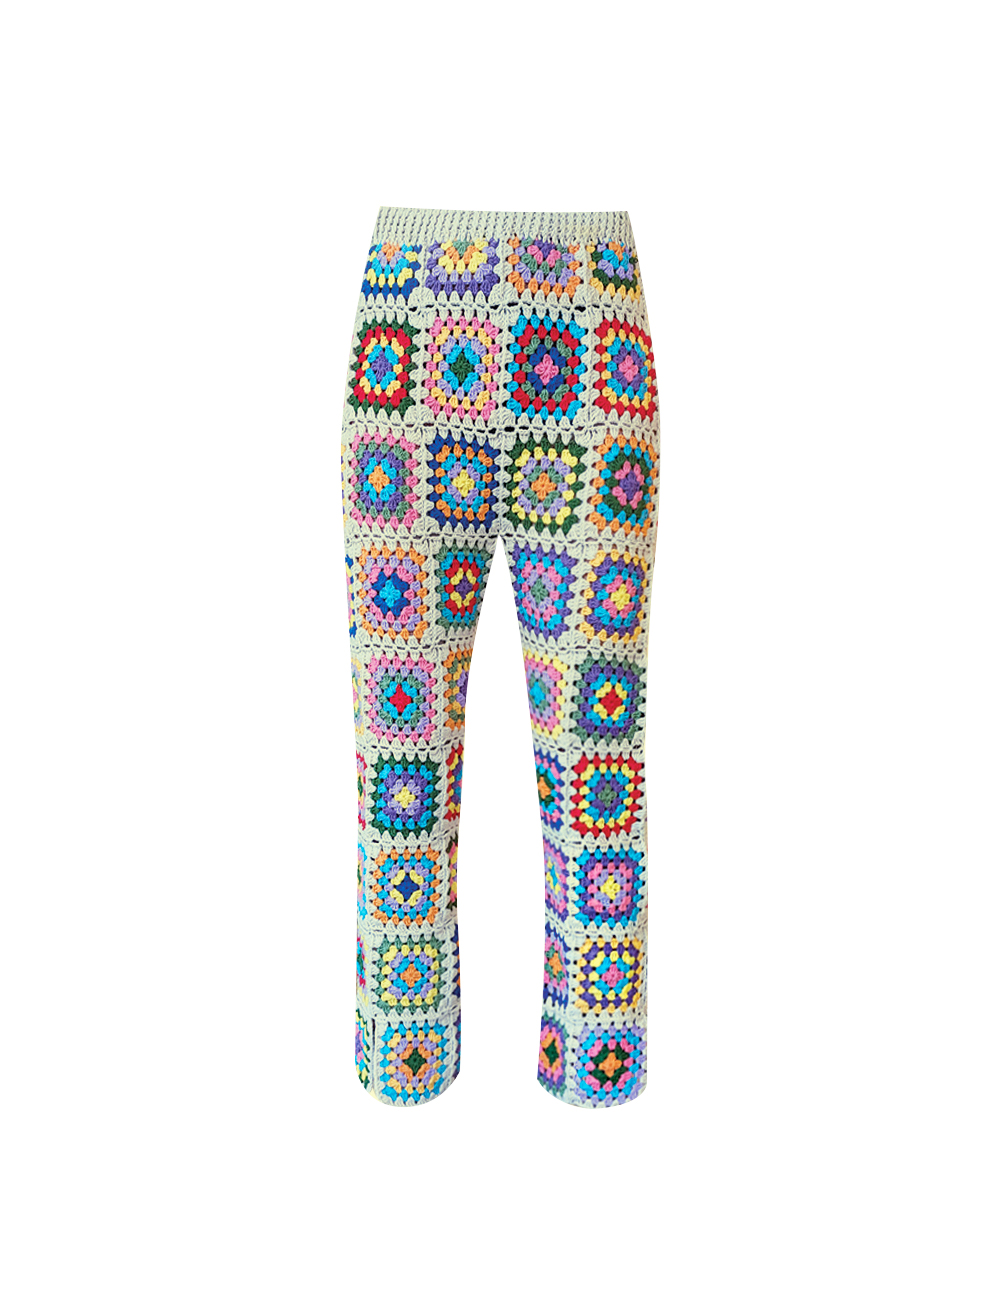 Buy Crochet Pants Granny Square Pants Handmade Rainbow Trousers READY TO  SHIP Online in India - Etsy